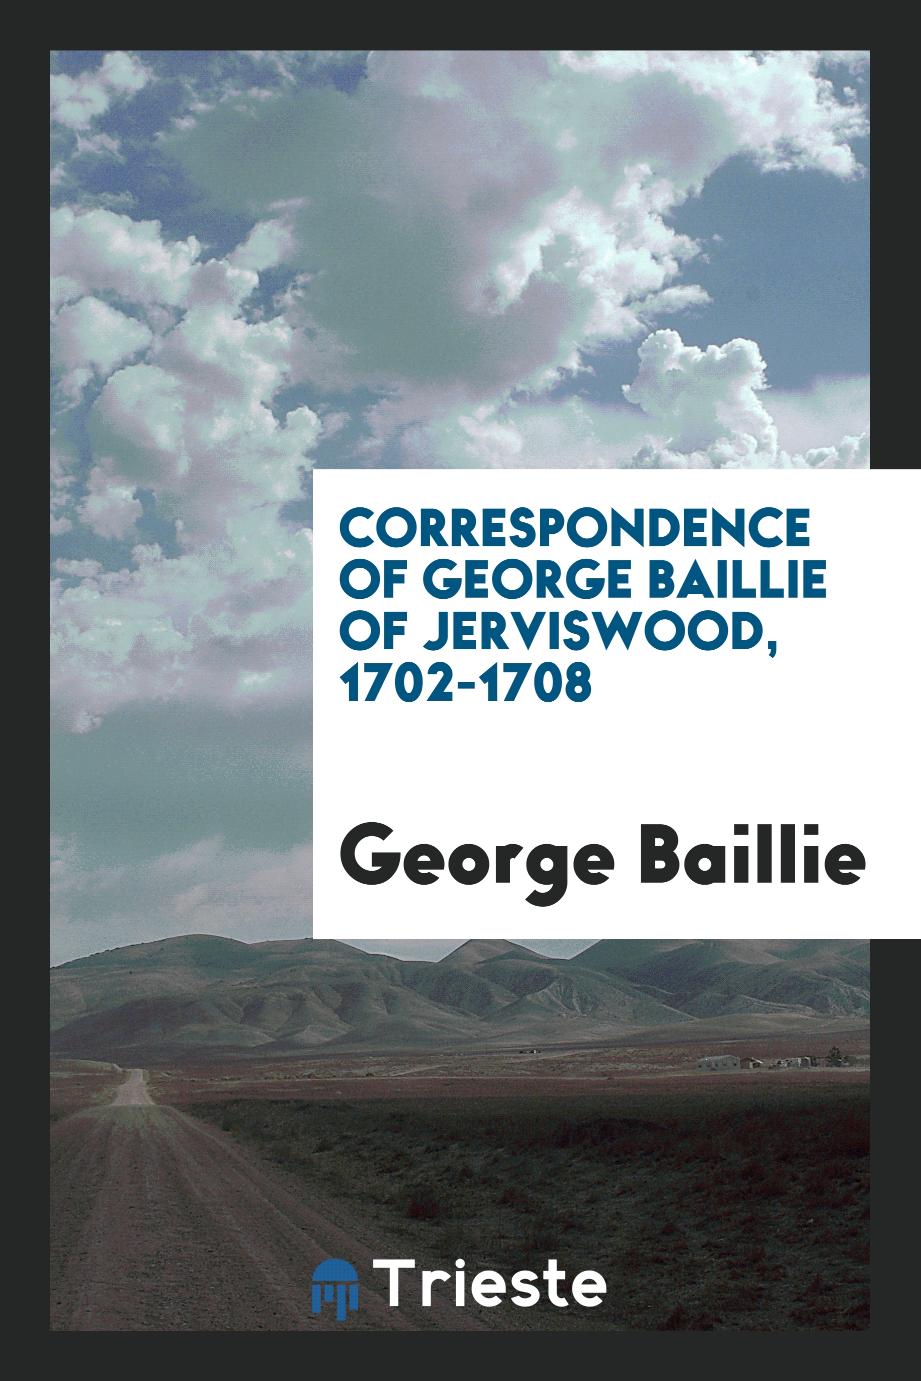 Correspondence of George Baillie of Jerviswood, 1702-1708